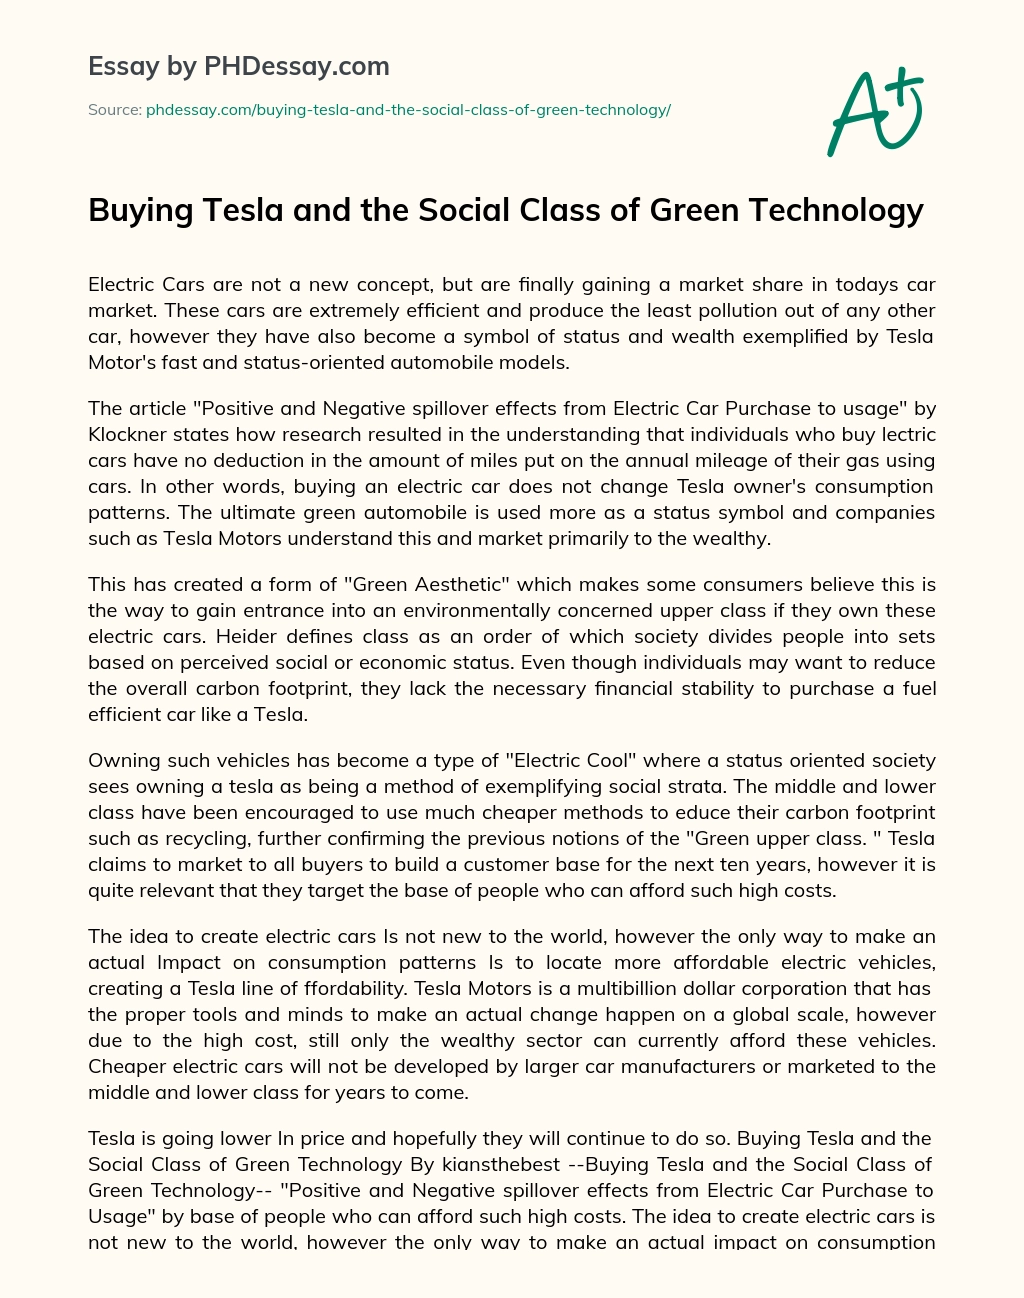 Buying Tesla and the Social Class of Green Technology essay